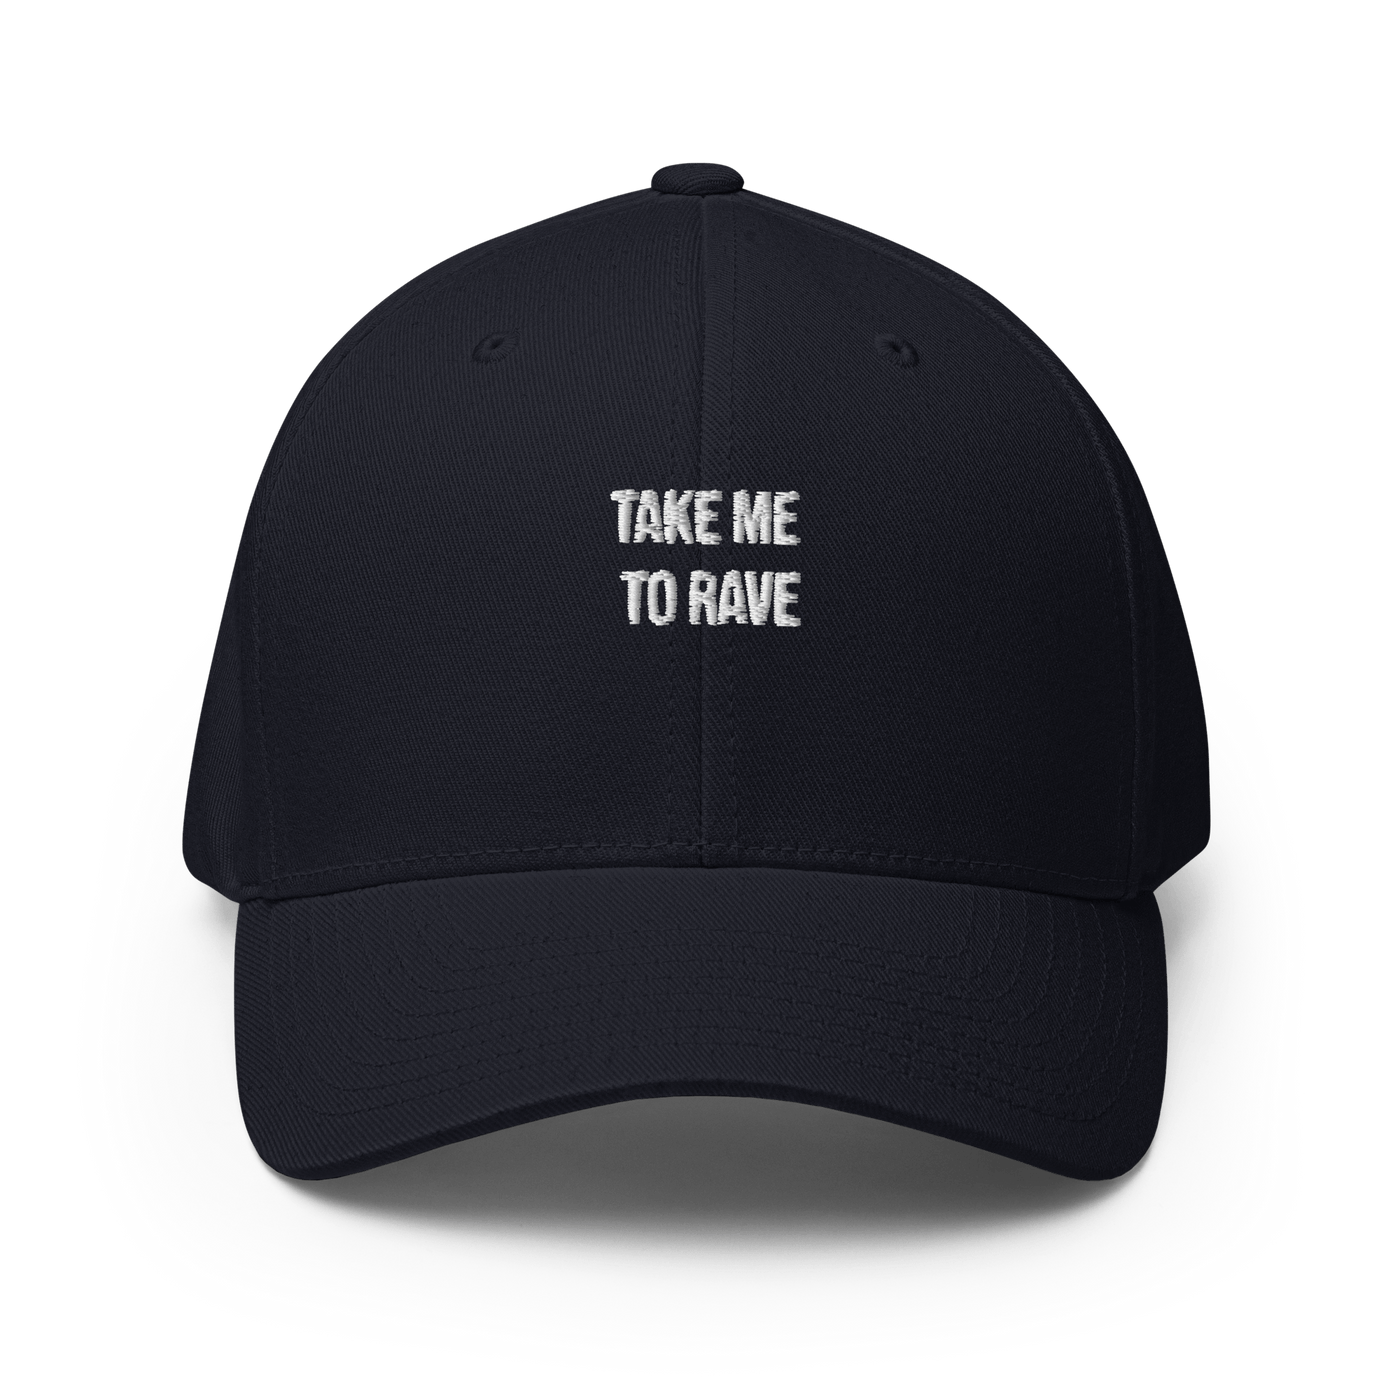 Take me to rave Flexfit Cap - Olive - S/M - Just Another Cap Store